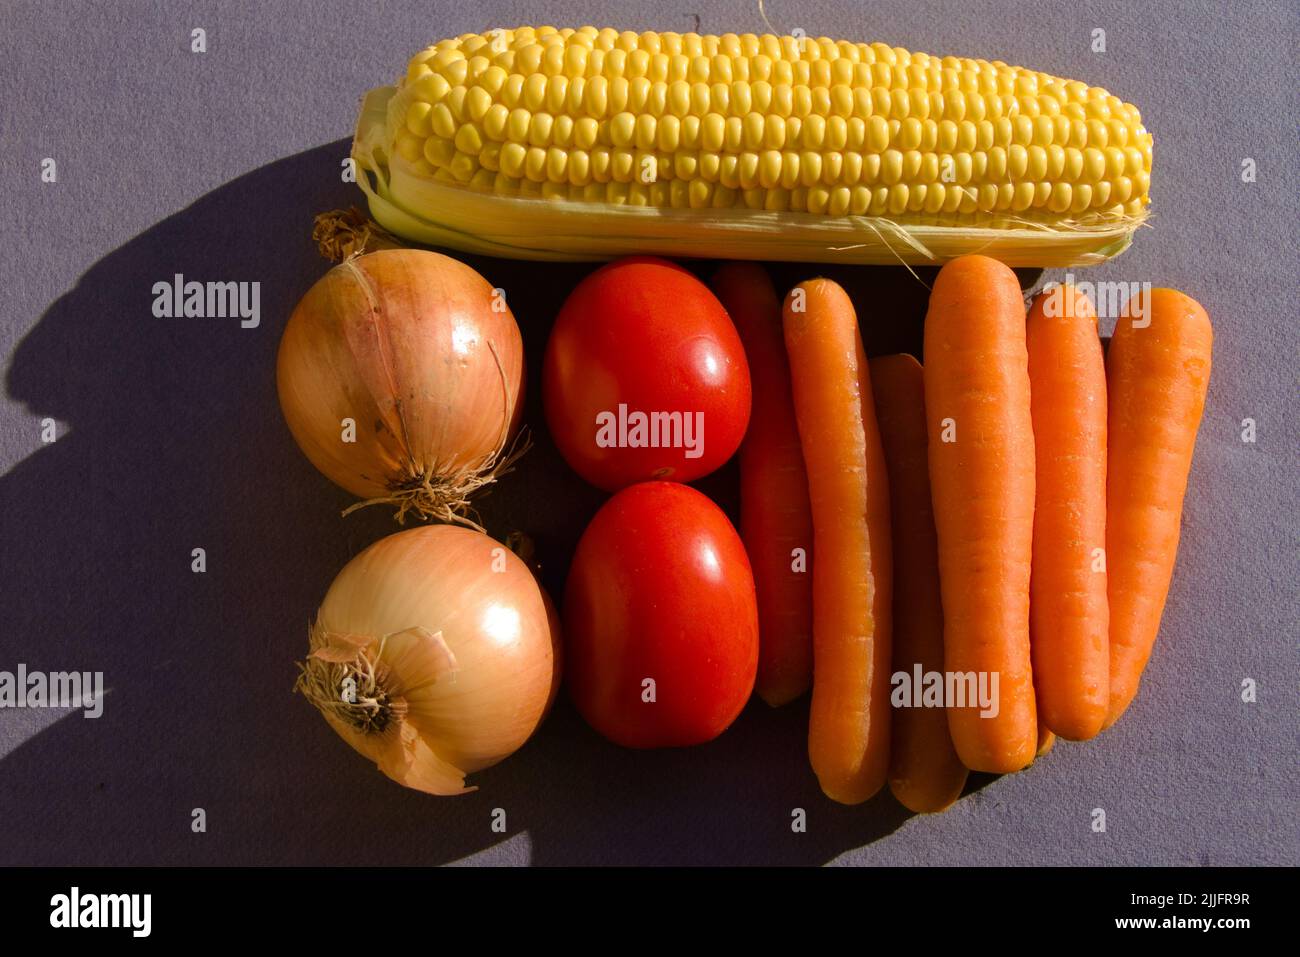 Prepared vegetables for soup or a mixed salad: raw carrots, onions, corn, tomatoes Stock Photo